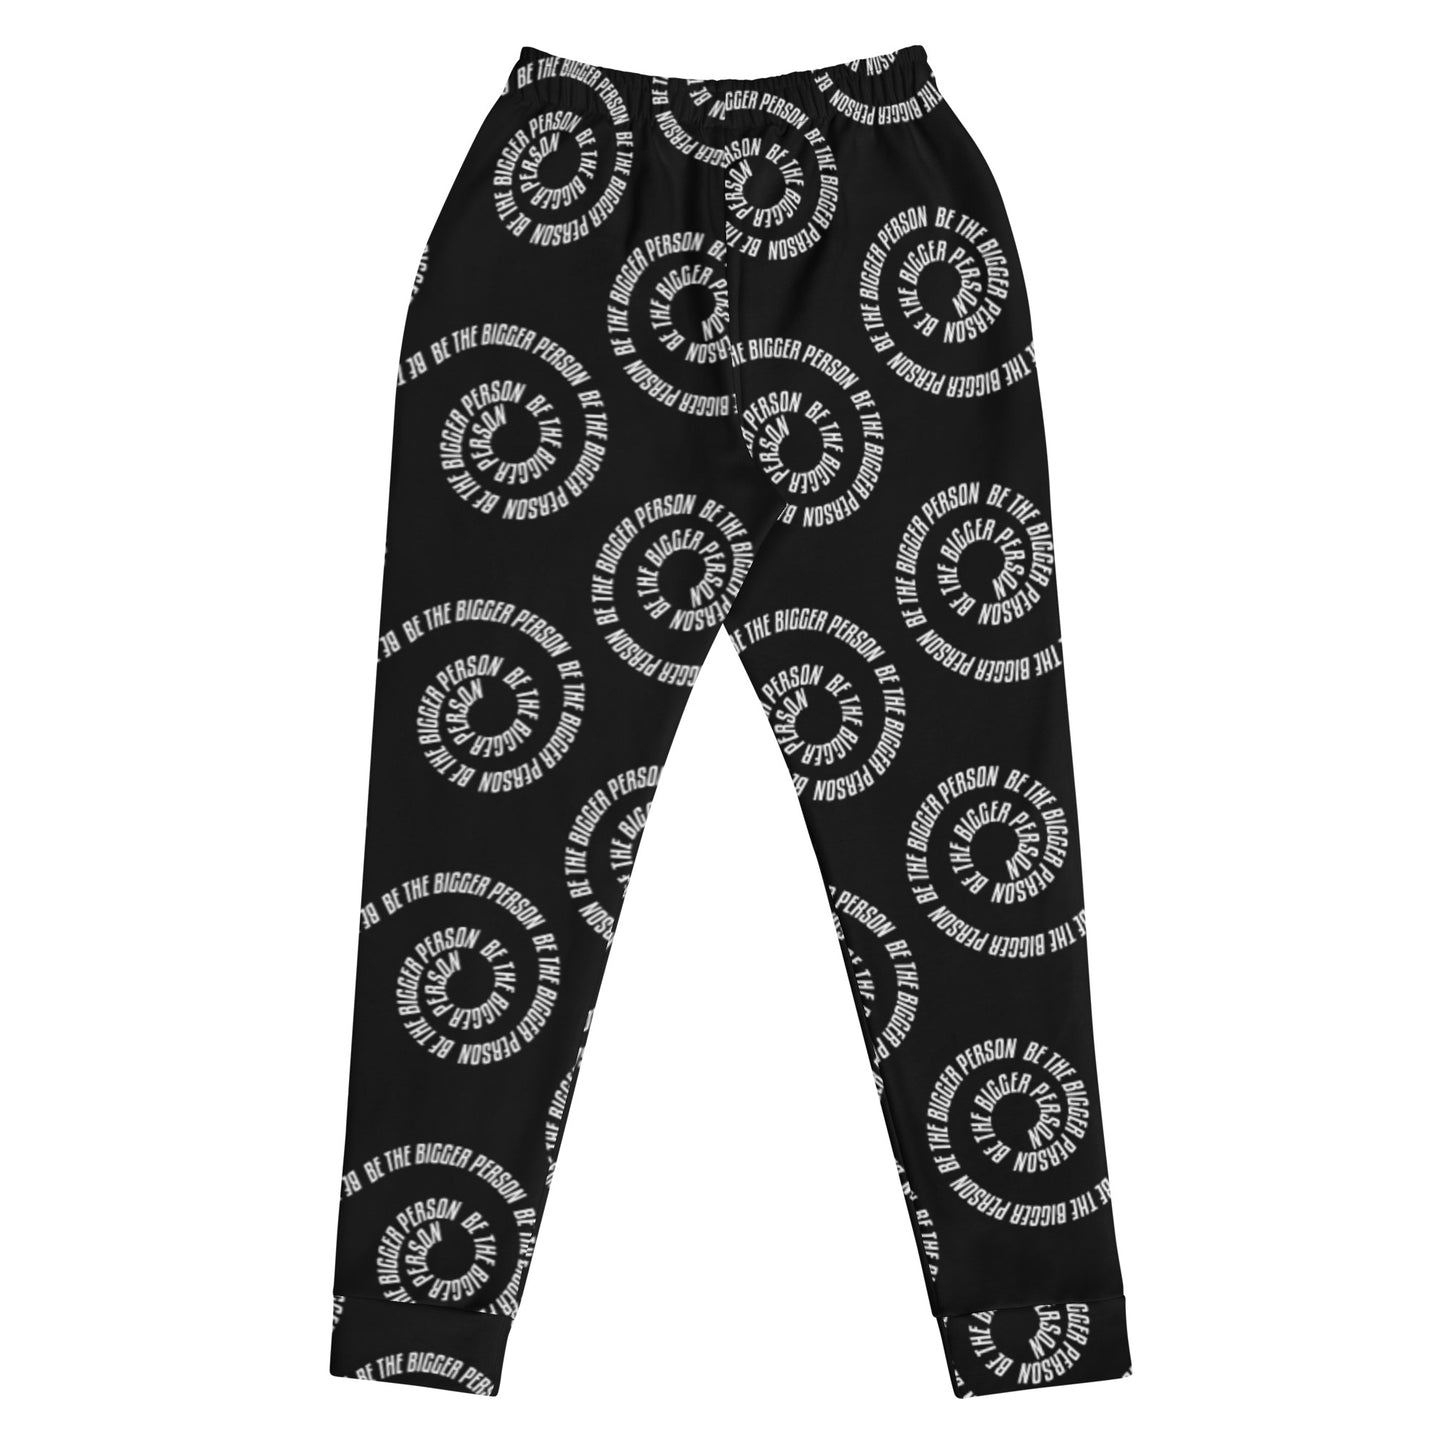 MIND GAMES - Women's Joggers